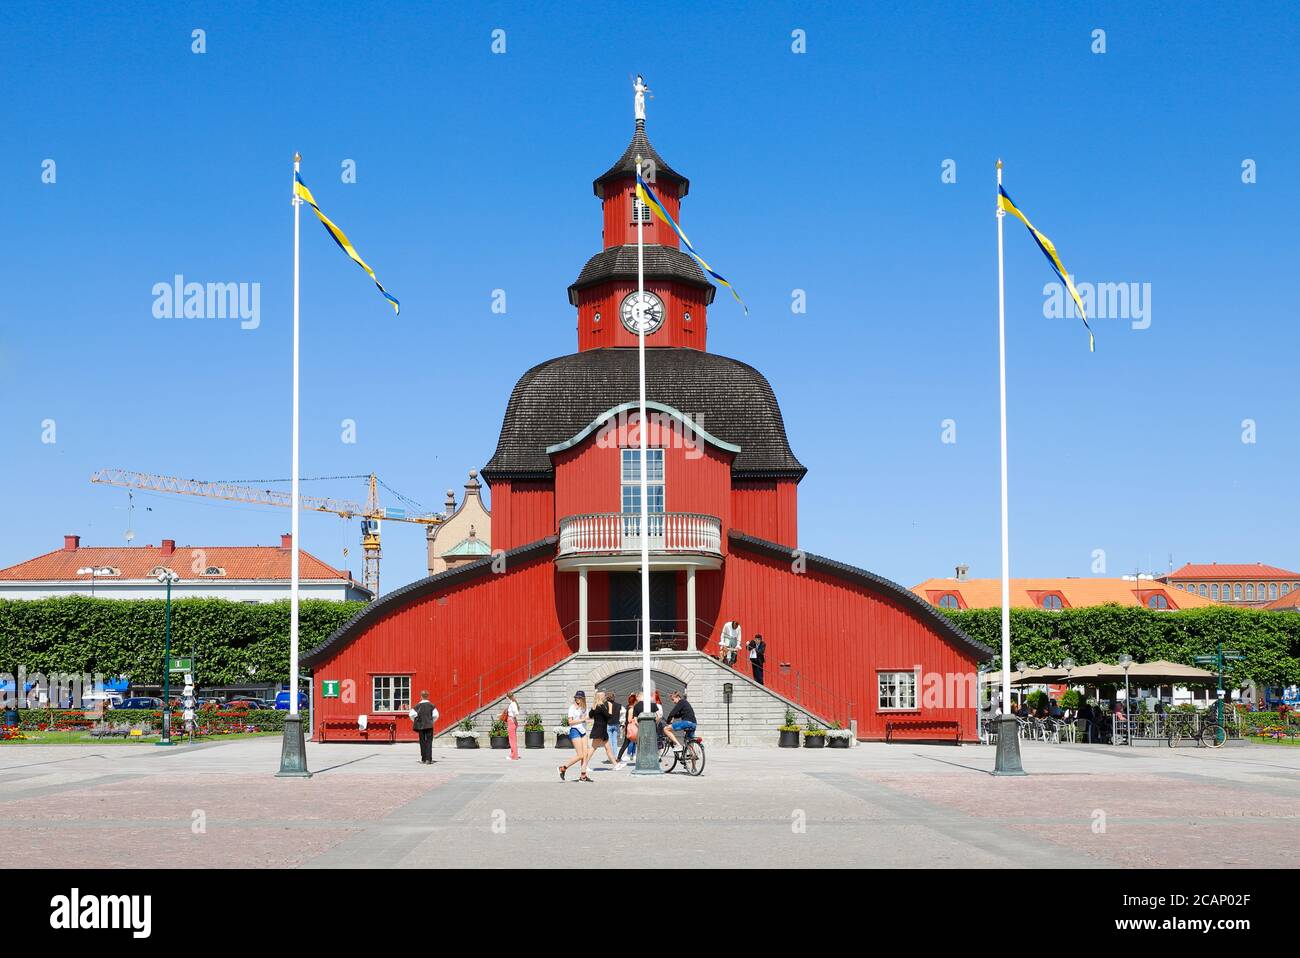 Lidkoping, Sweden - June 23, 2020: View of the Lidkoping town hall located at the city square. Stock Photo